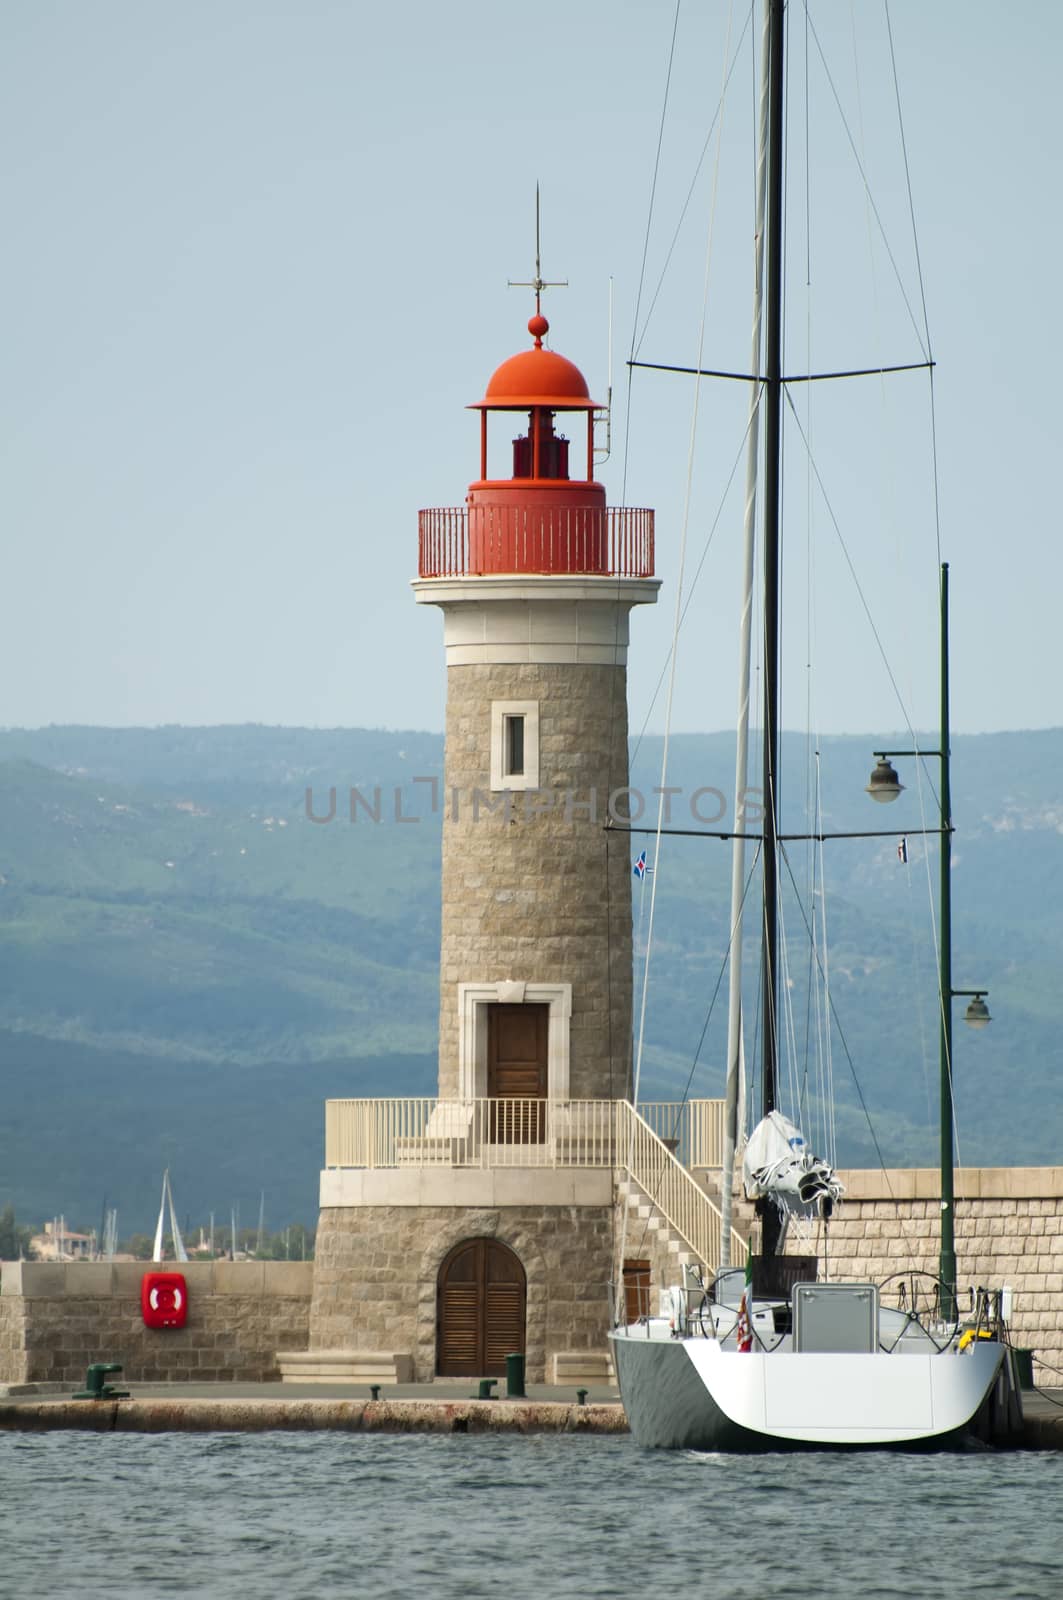 Port light in Saint Tropez and anchored boat